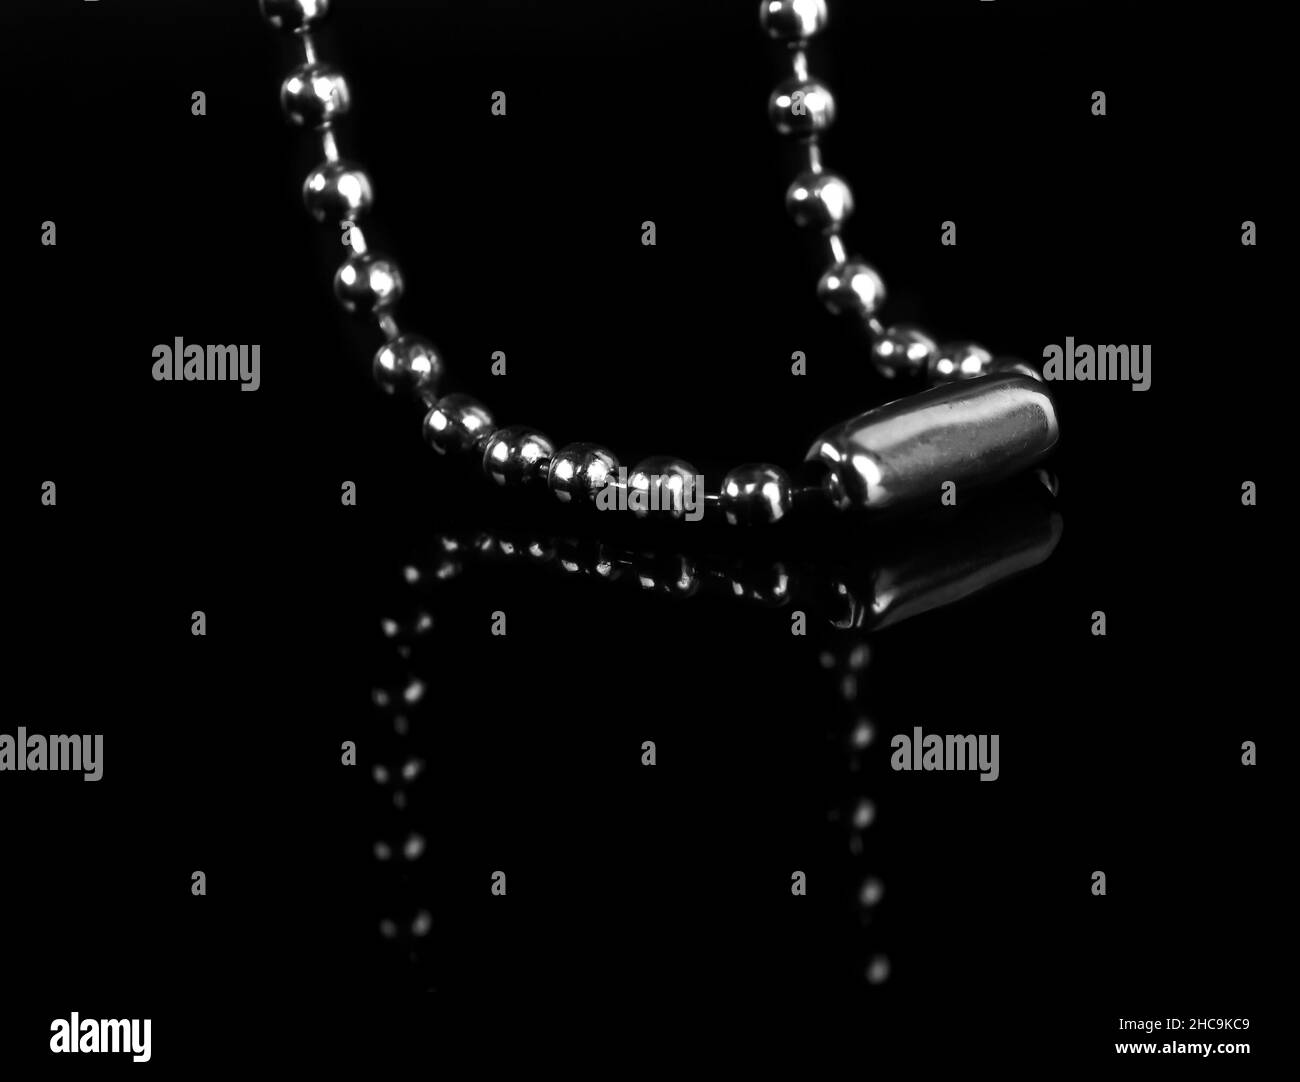 chain for a keychain, on a black background isolated with reflection Stock Photo